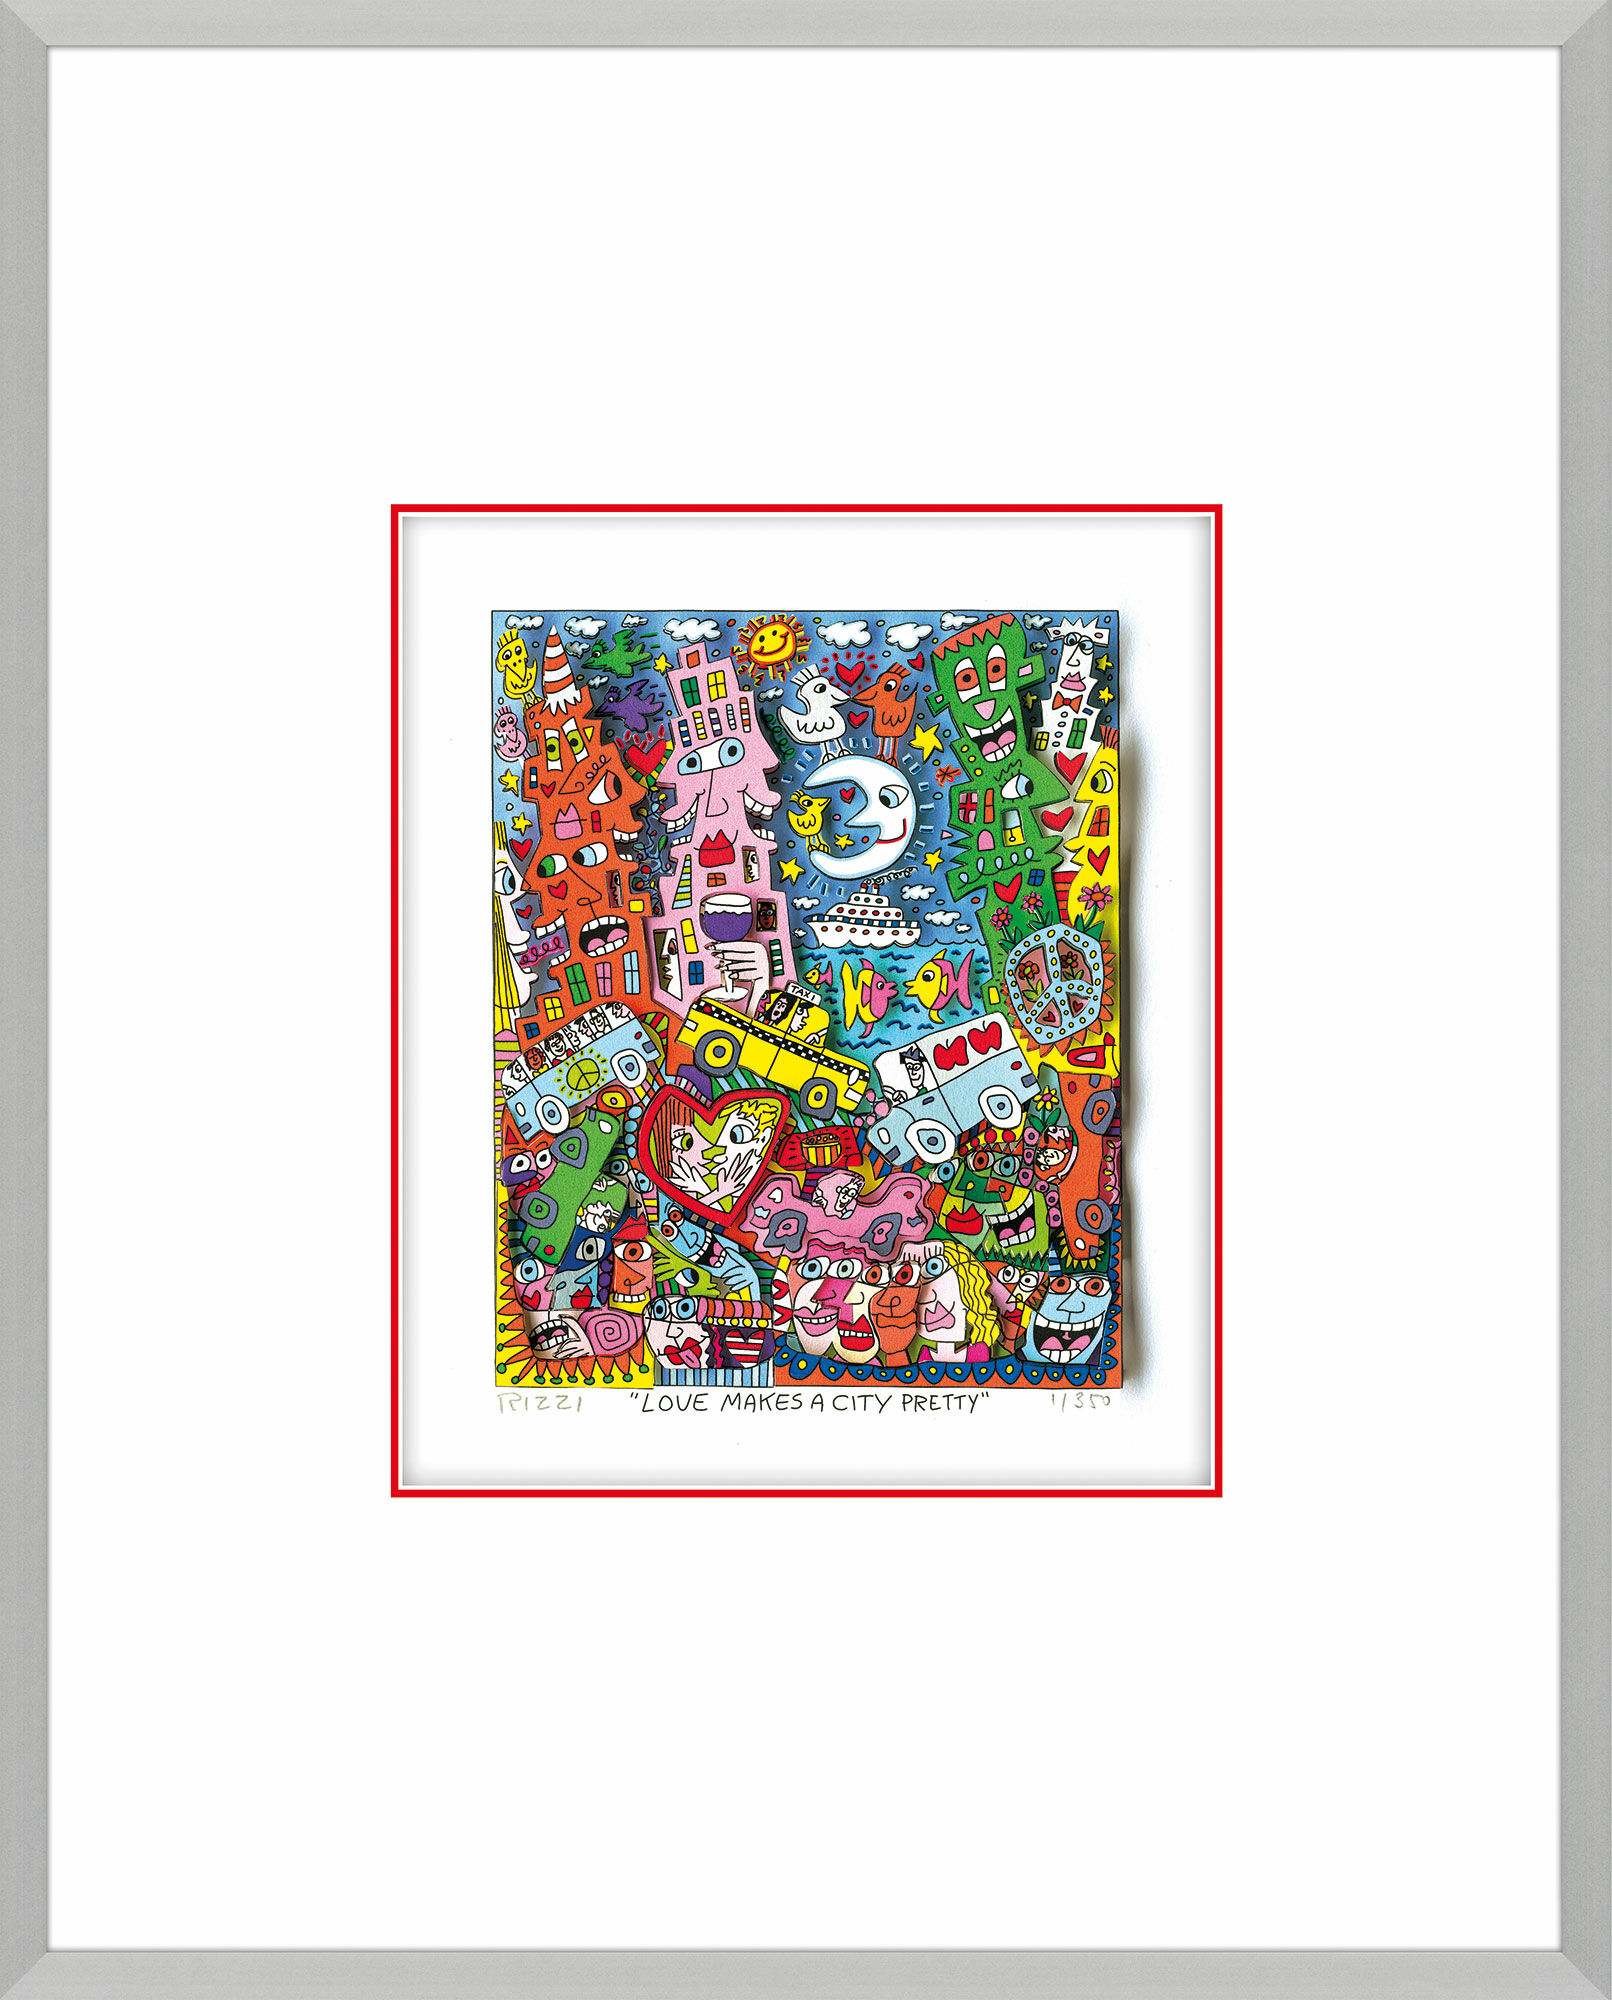 3D Picture "Love Makes a City Pretty" (2017), framed by James Rizzi